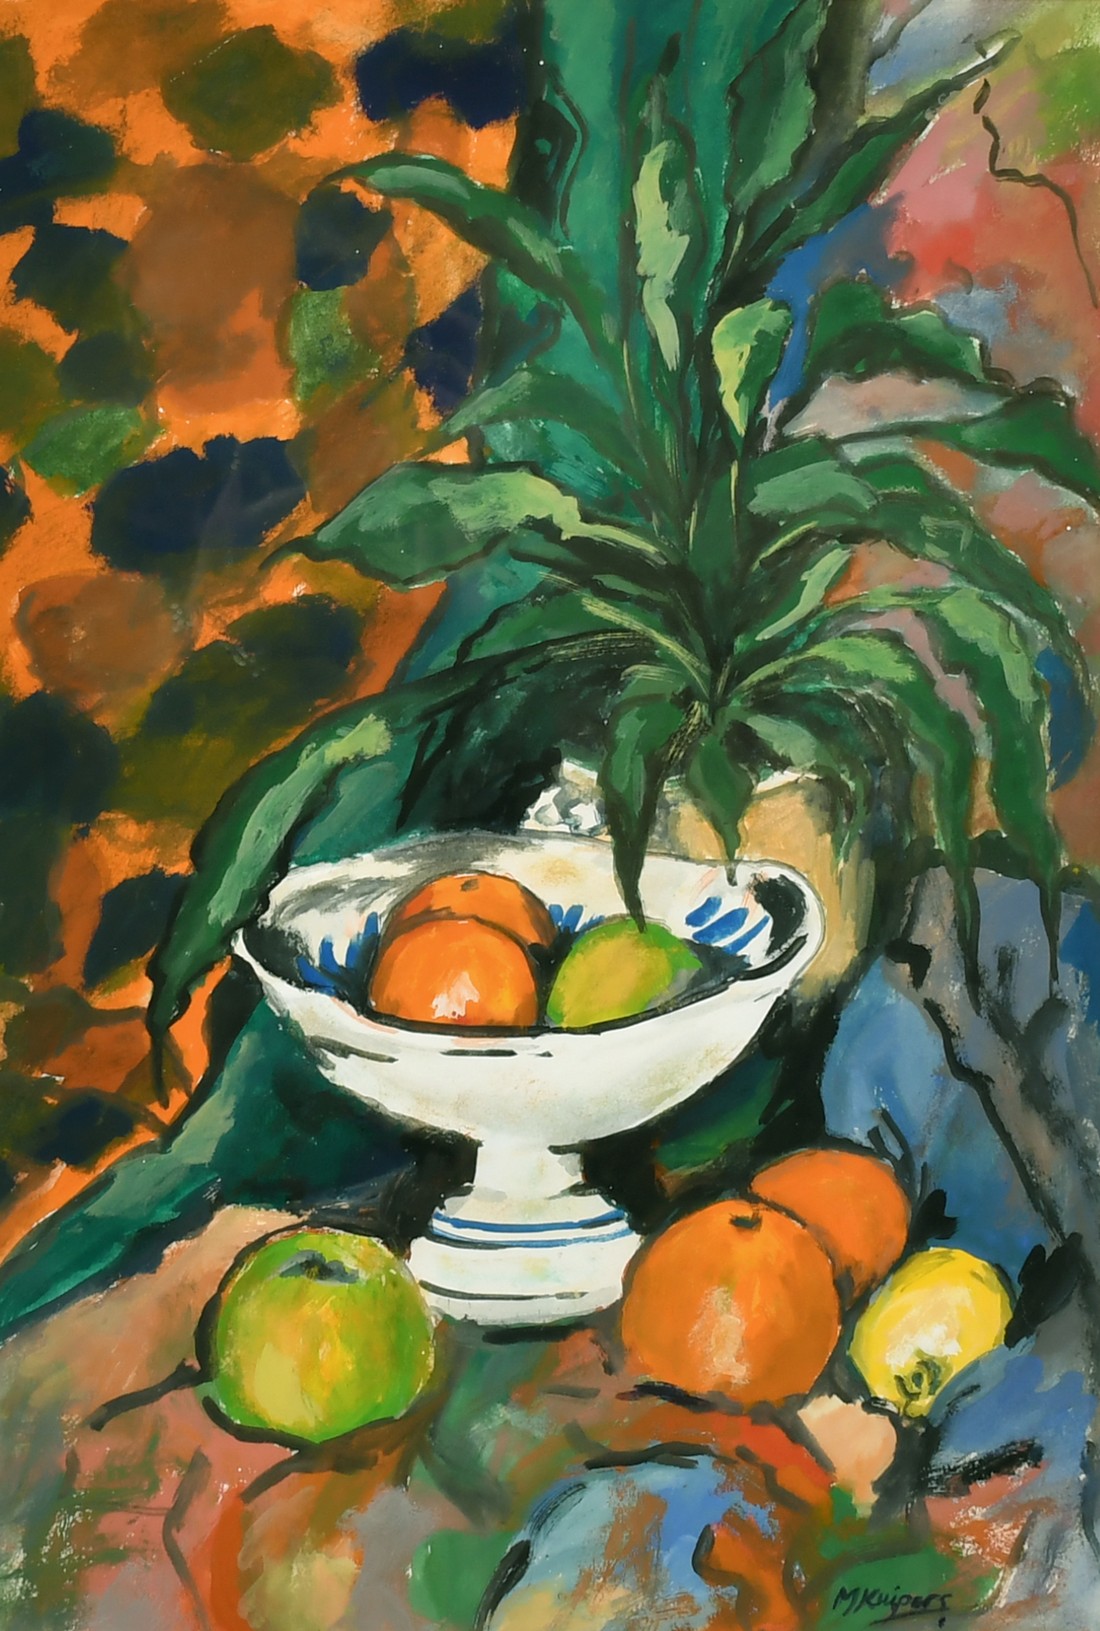 Maria Kuipers (20th Century), 'Bowl of Fruit', gouache, signed, label verso with title and dated